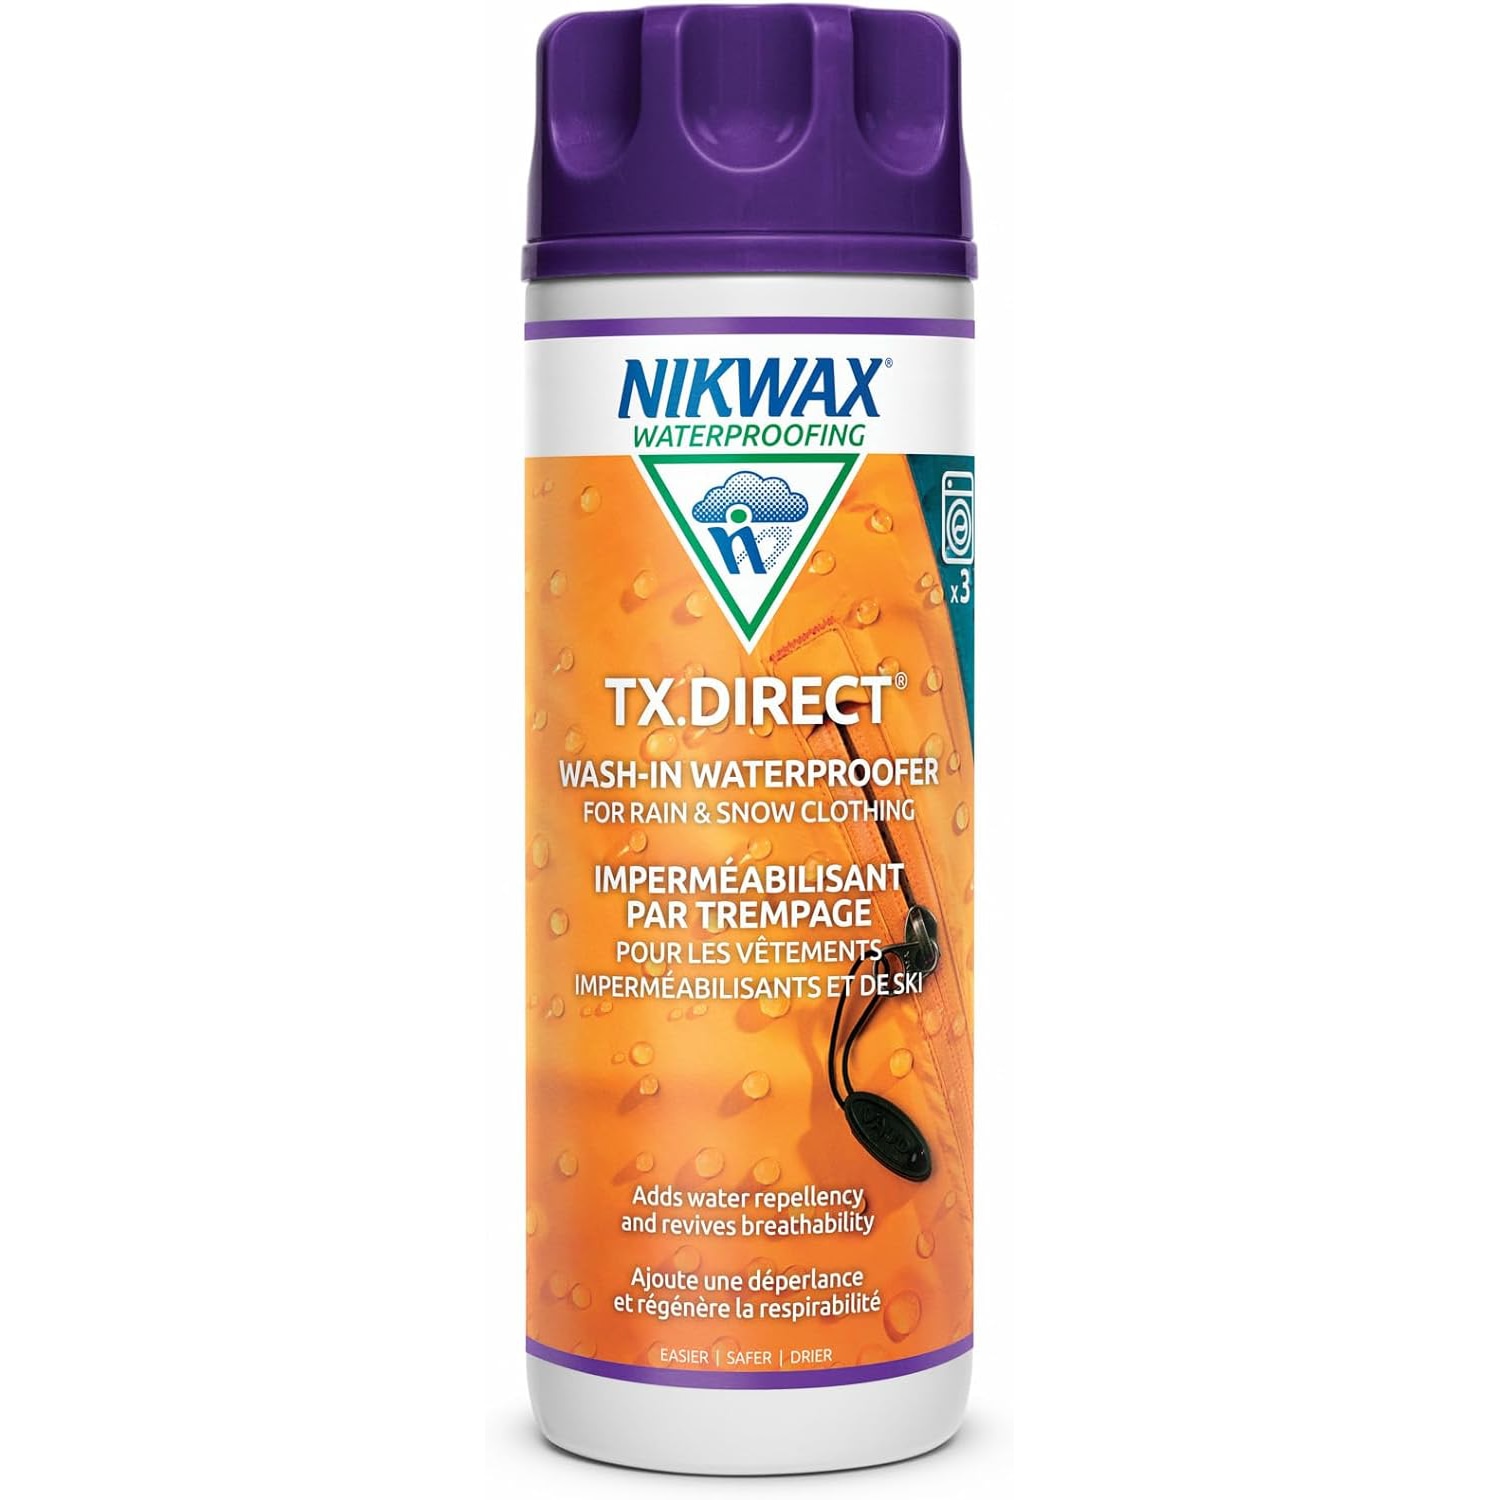 TX.Direct Wash-In Waterproofer For Rain & Snow Clothing 300mL